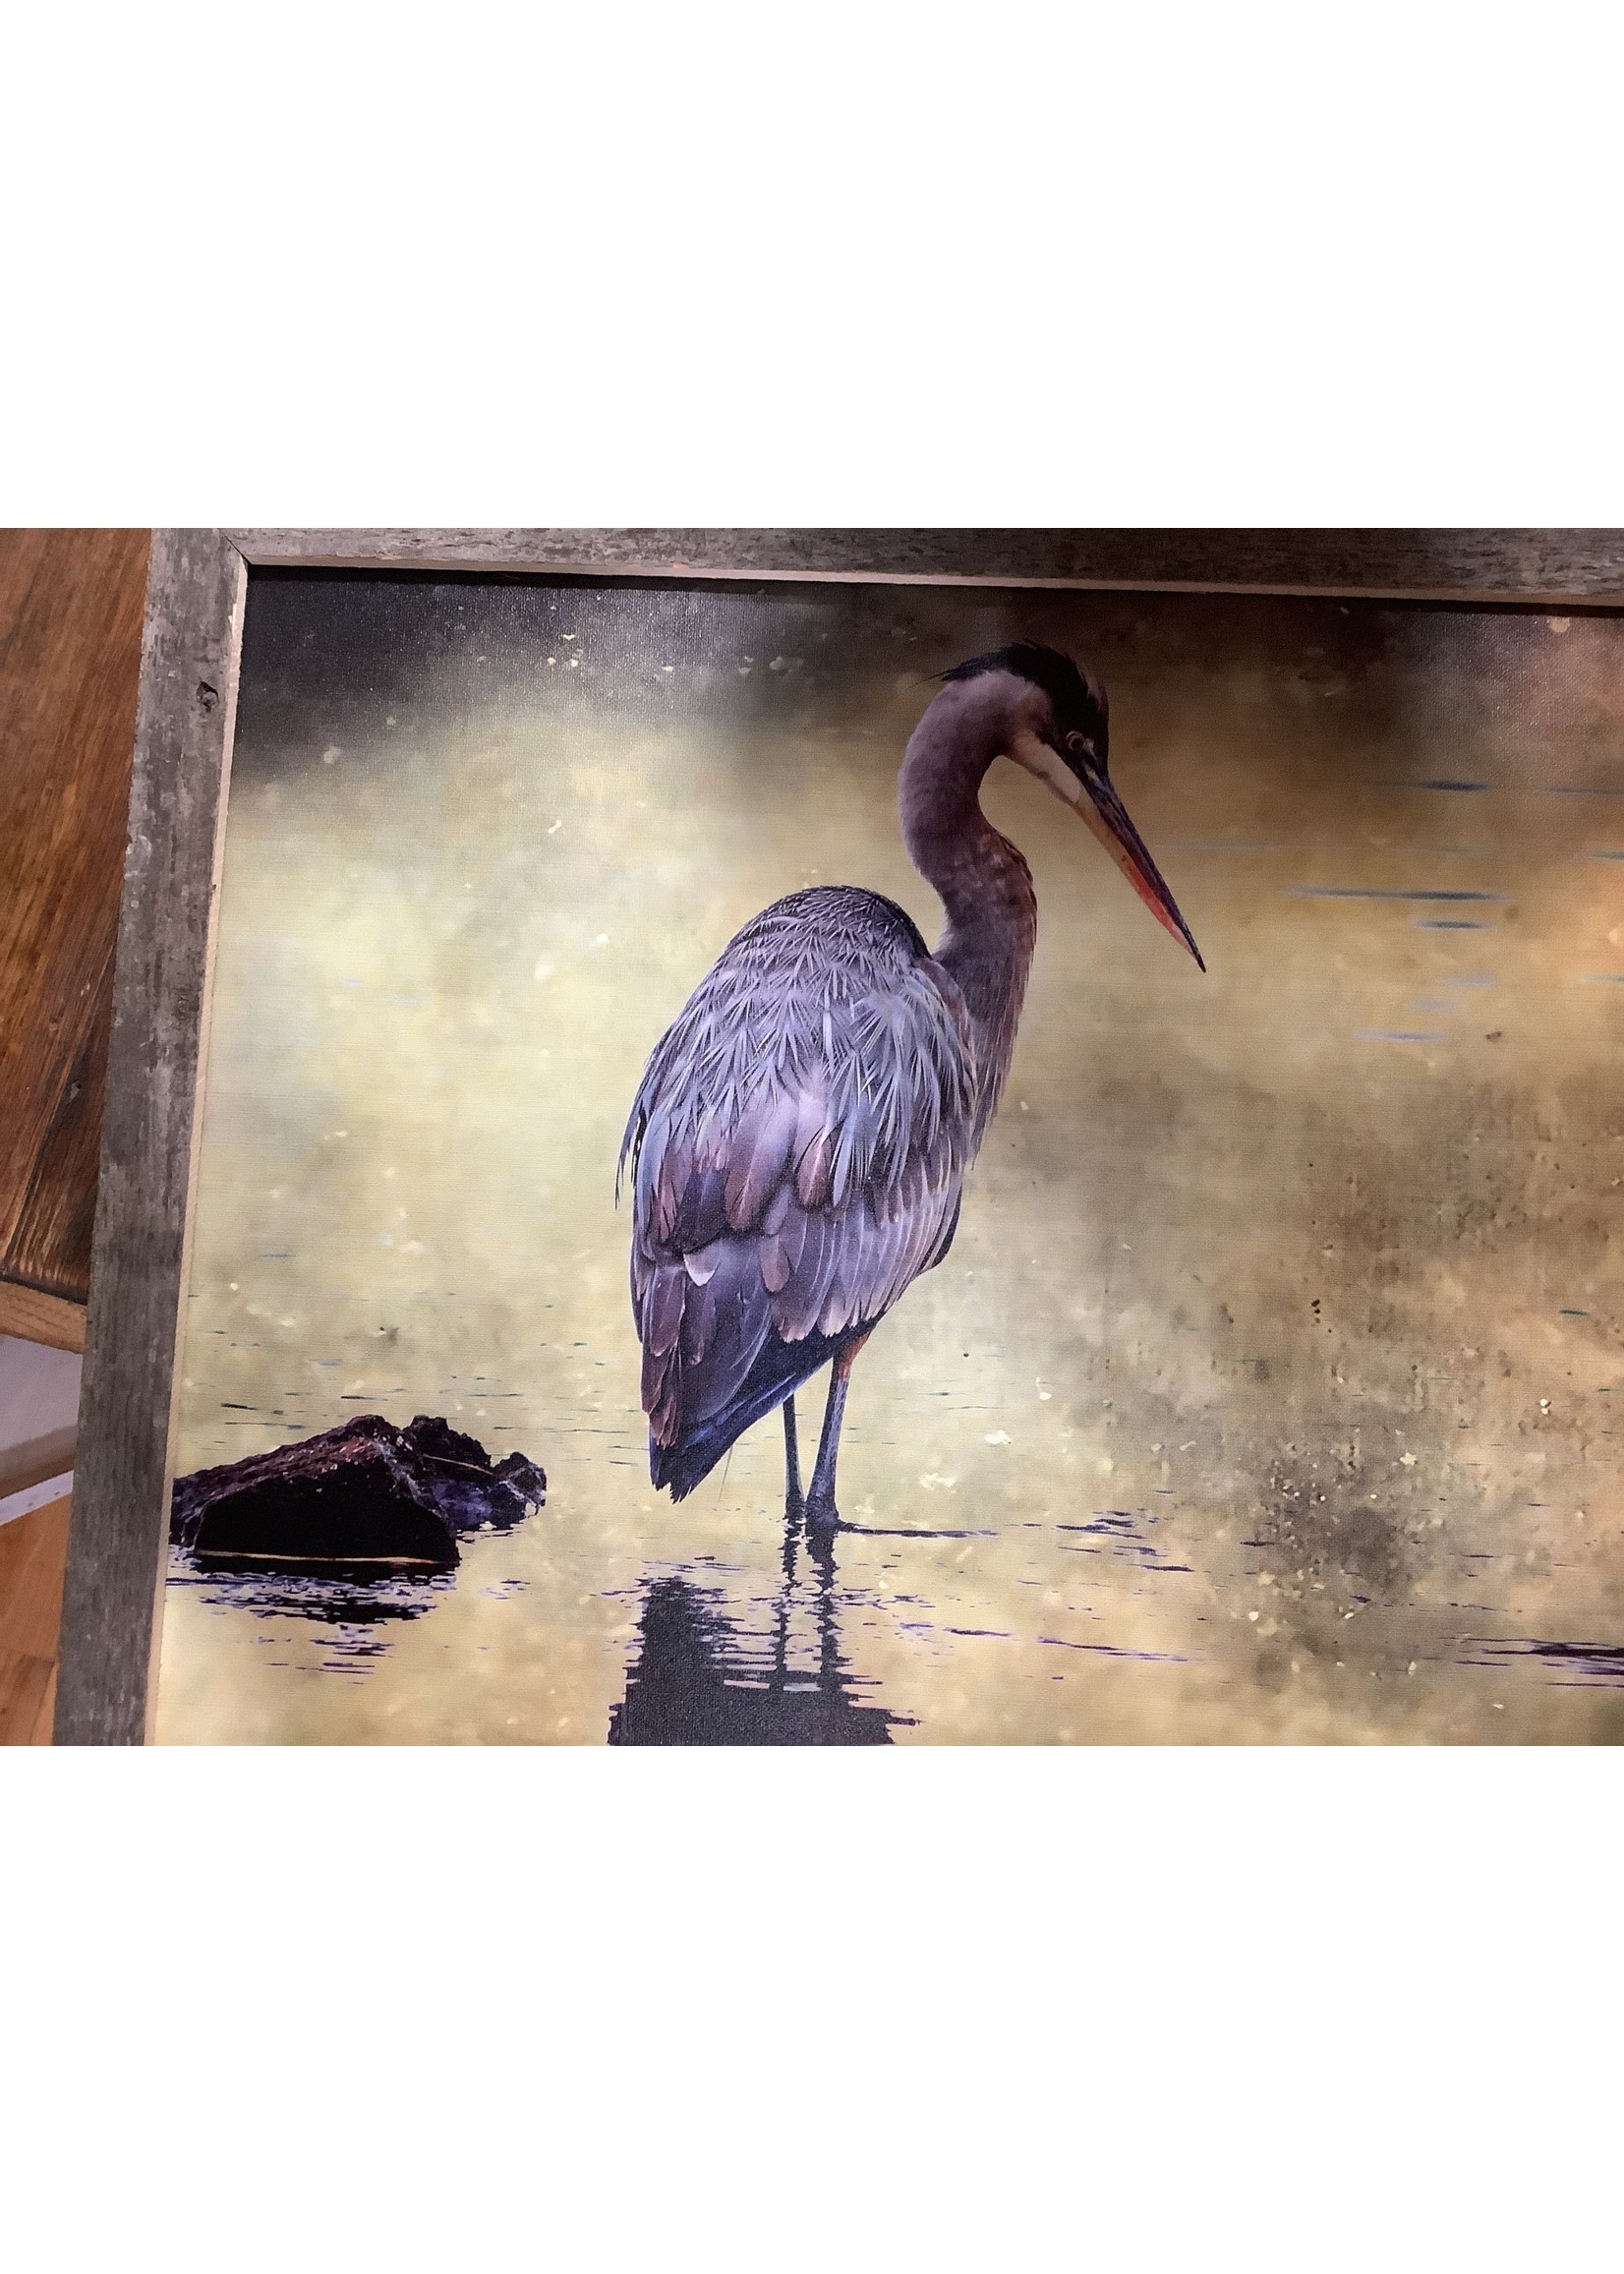 Old Wood Delaware OW Canvas Art - Blue Heron Standing in Water 26x20  Framed